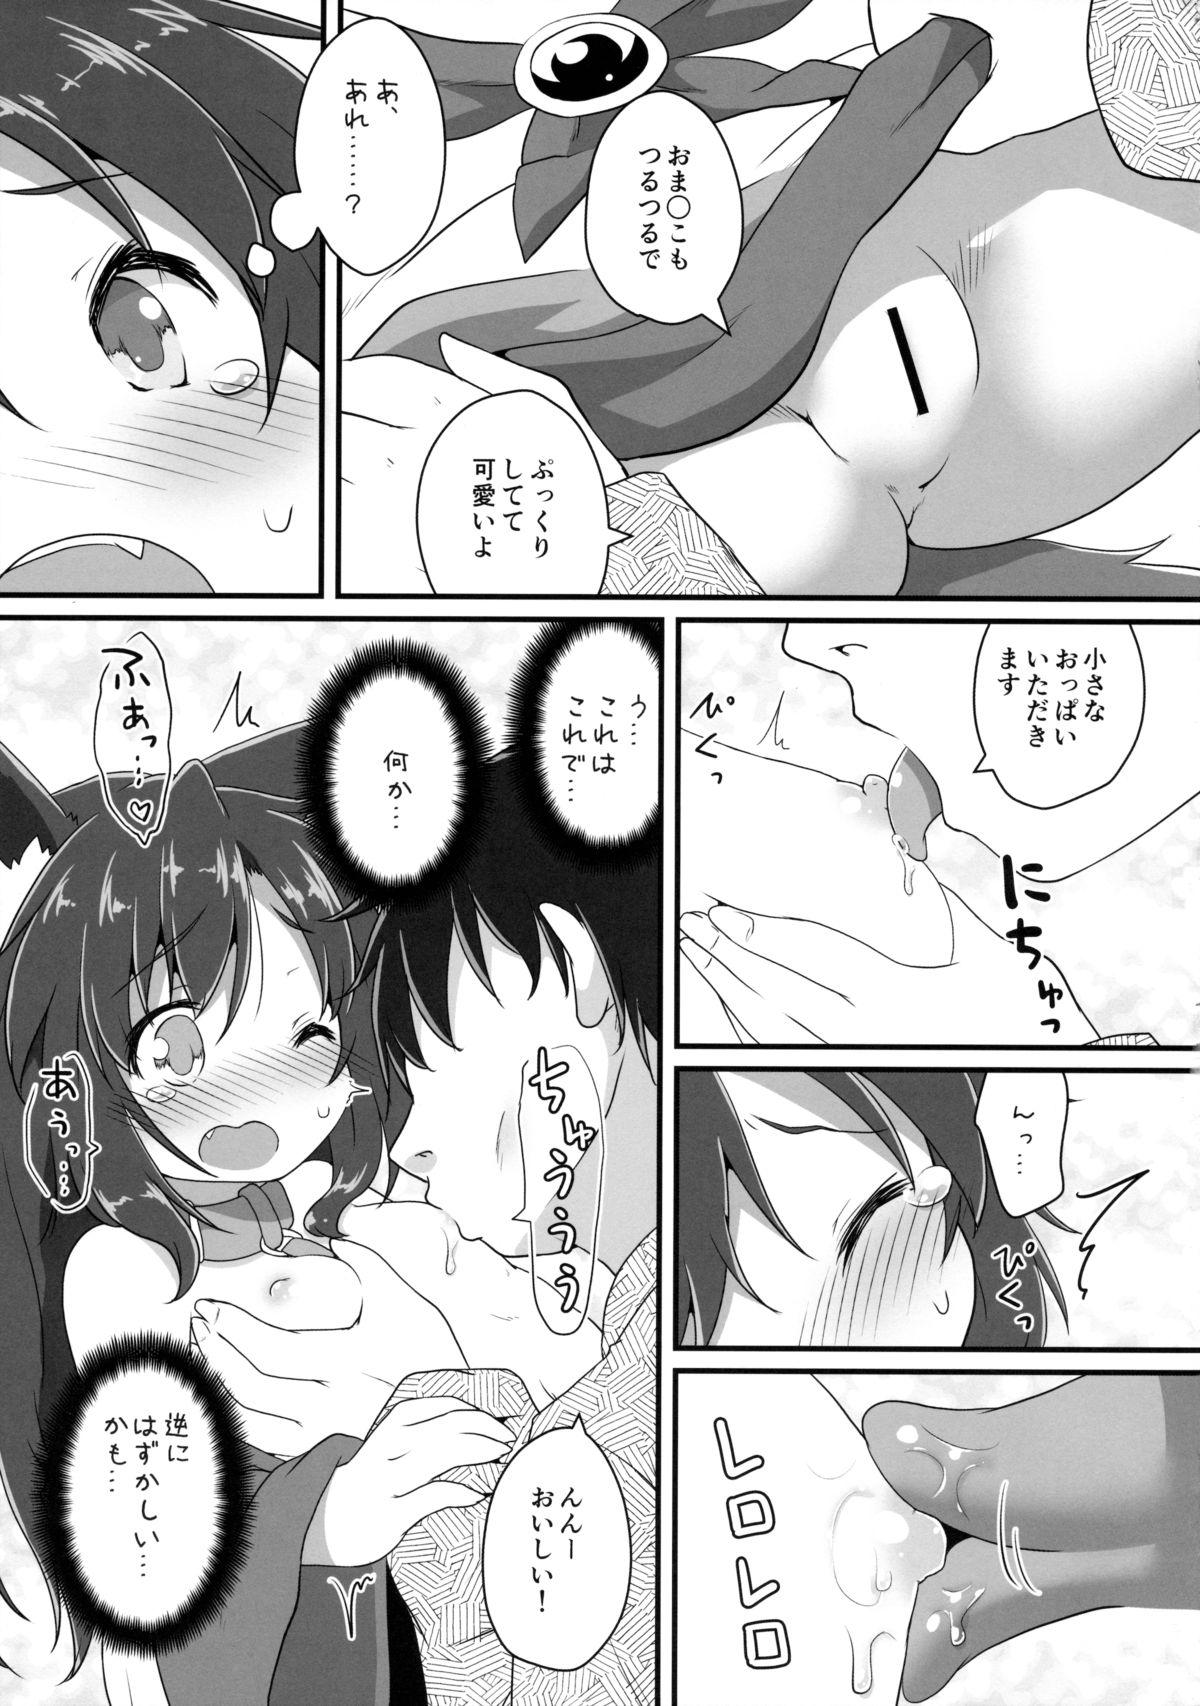 Trimmed Chiisana Loup-garou - Touhou project Perverted - Page 10